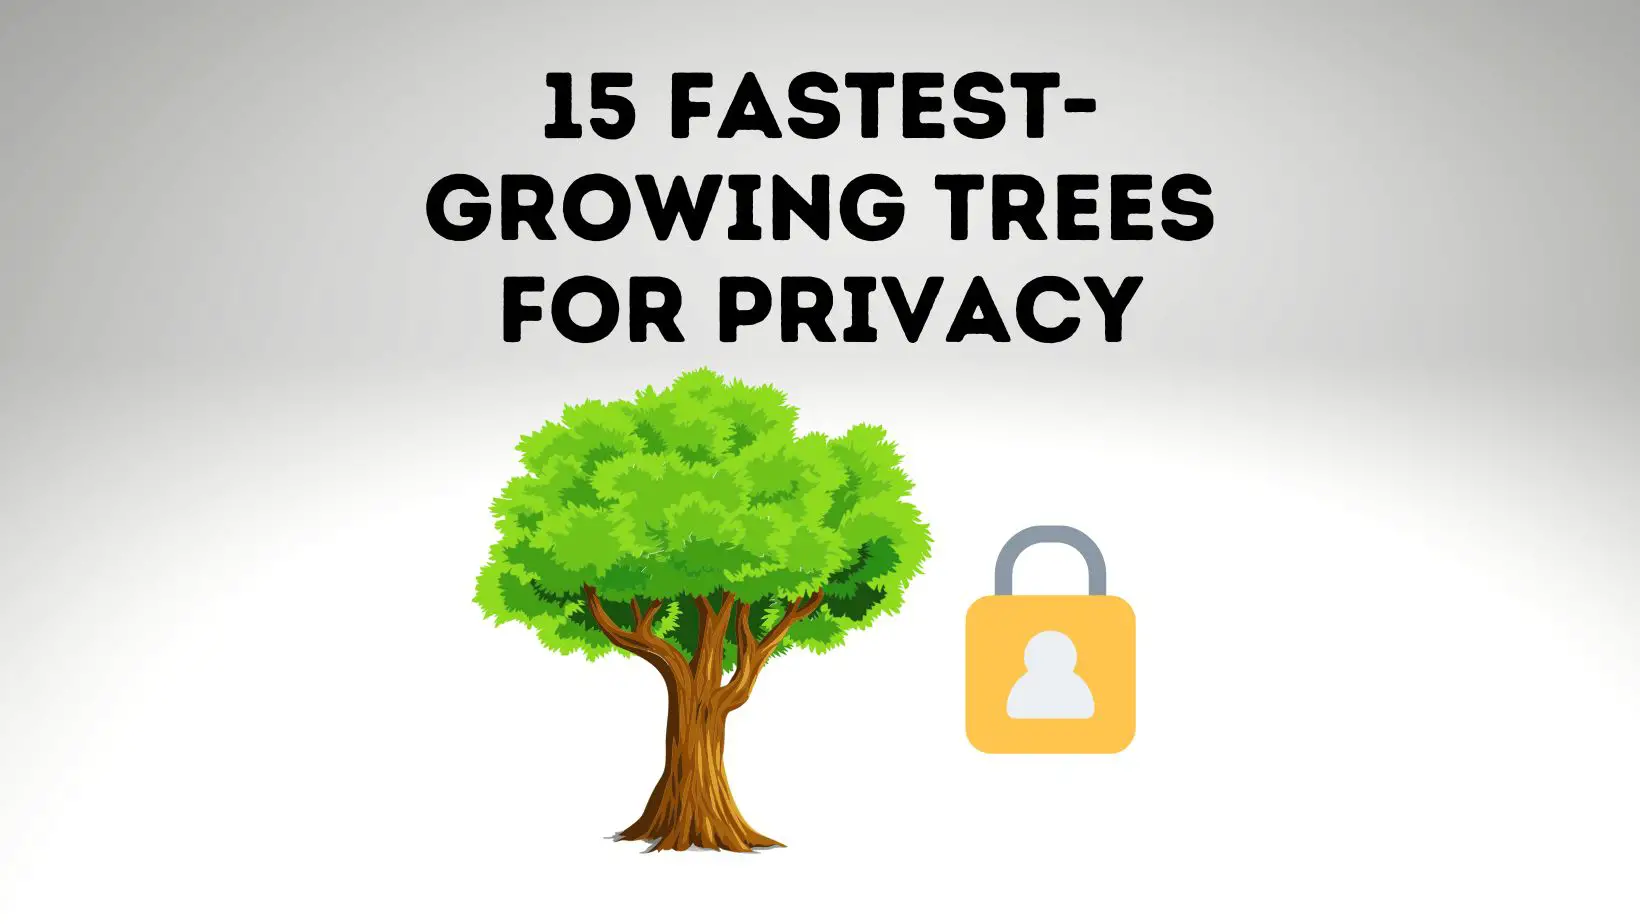 Fastest-Growing Trees